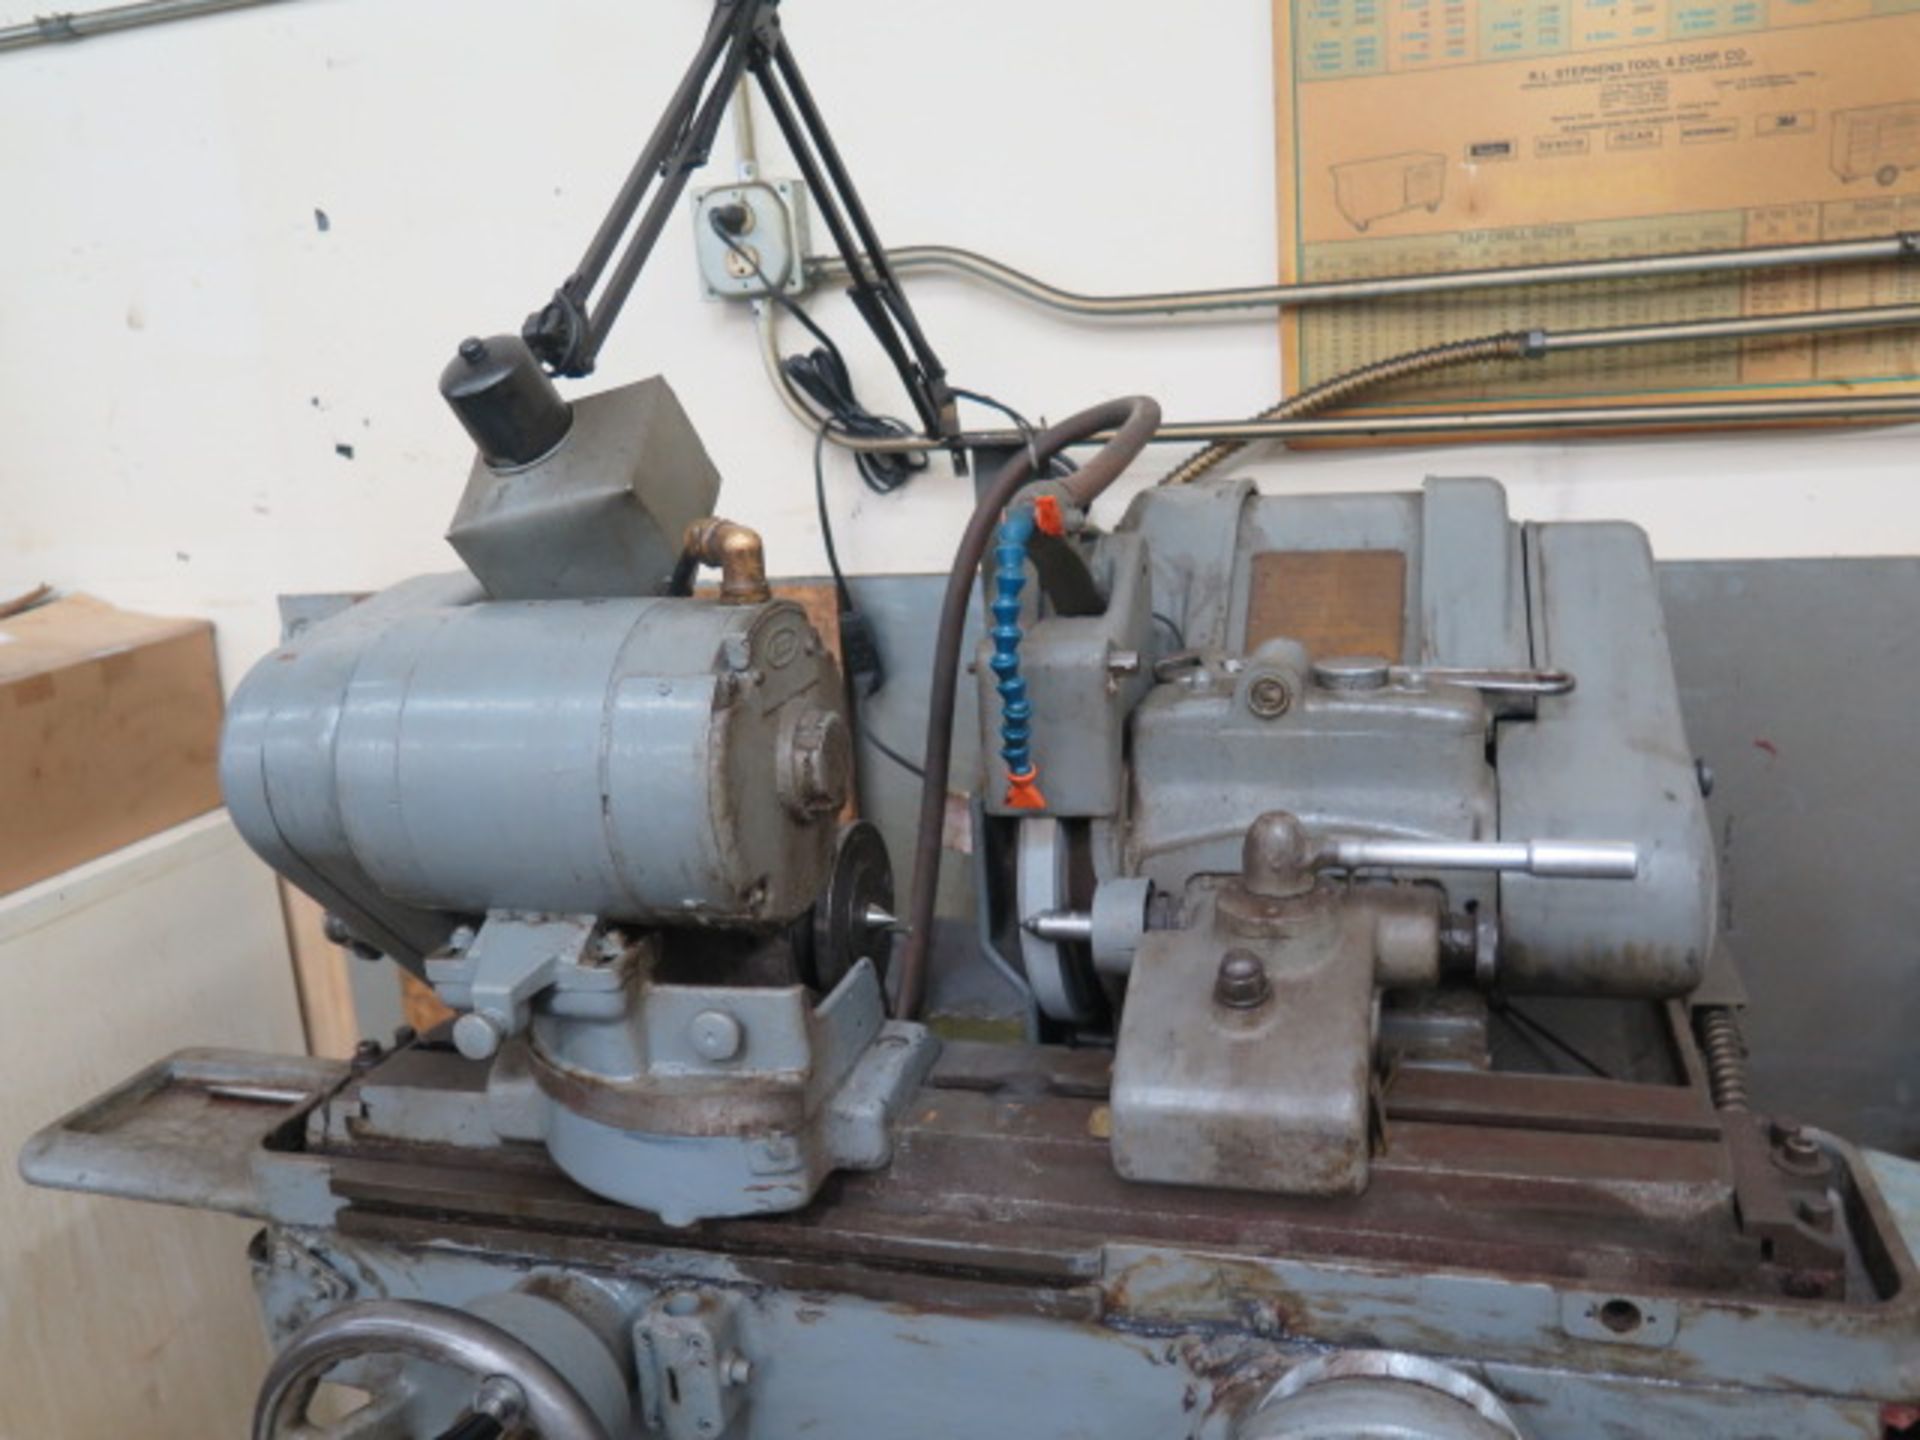 Myford 5” x 12” Cylindrical Grinder s/n S60468 w/ Motorized Grinding Head, Tailstock, Coolant - Image 4 of 8